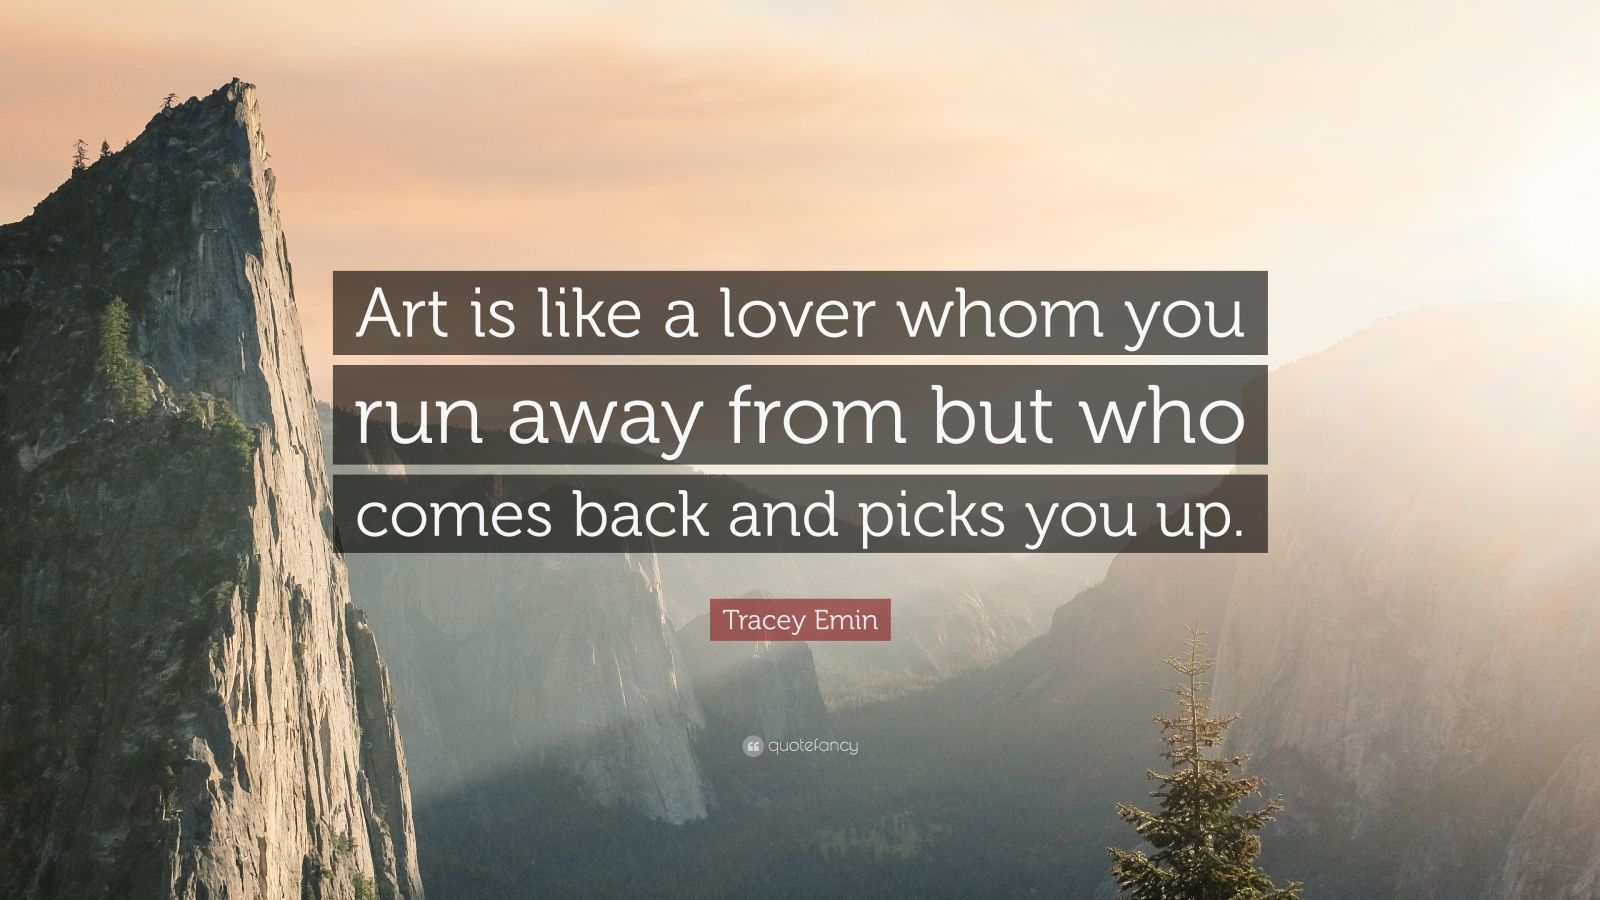 Tracey Emin Quote “Art is like a lover whom you run away from but who